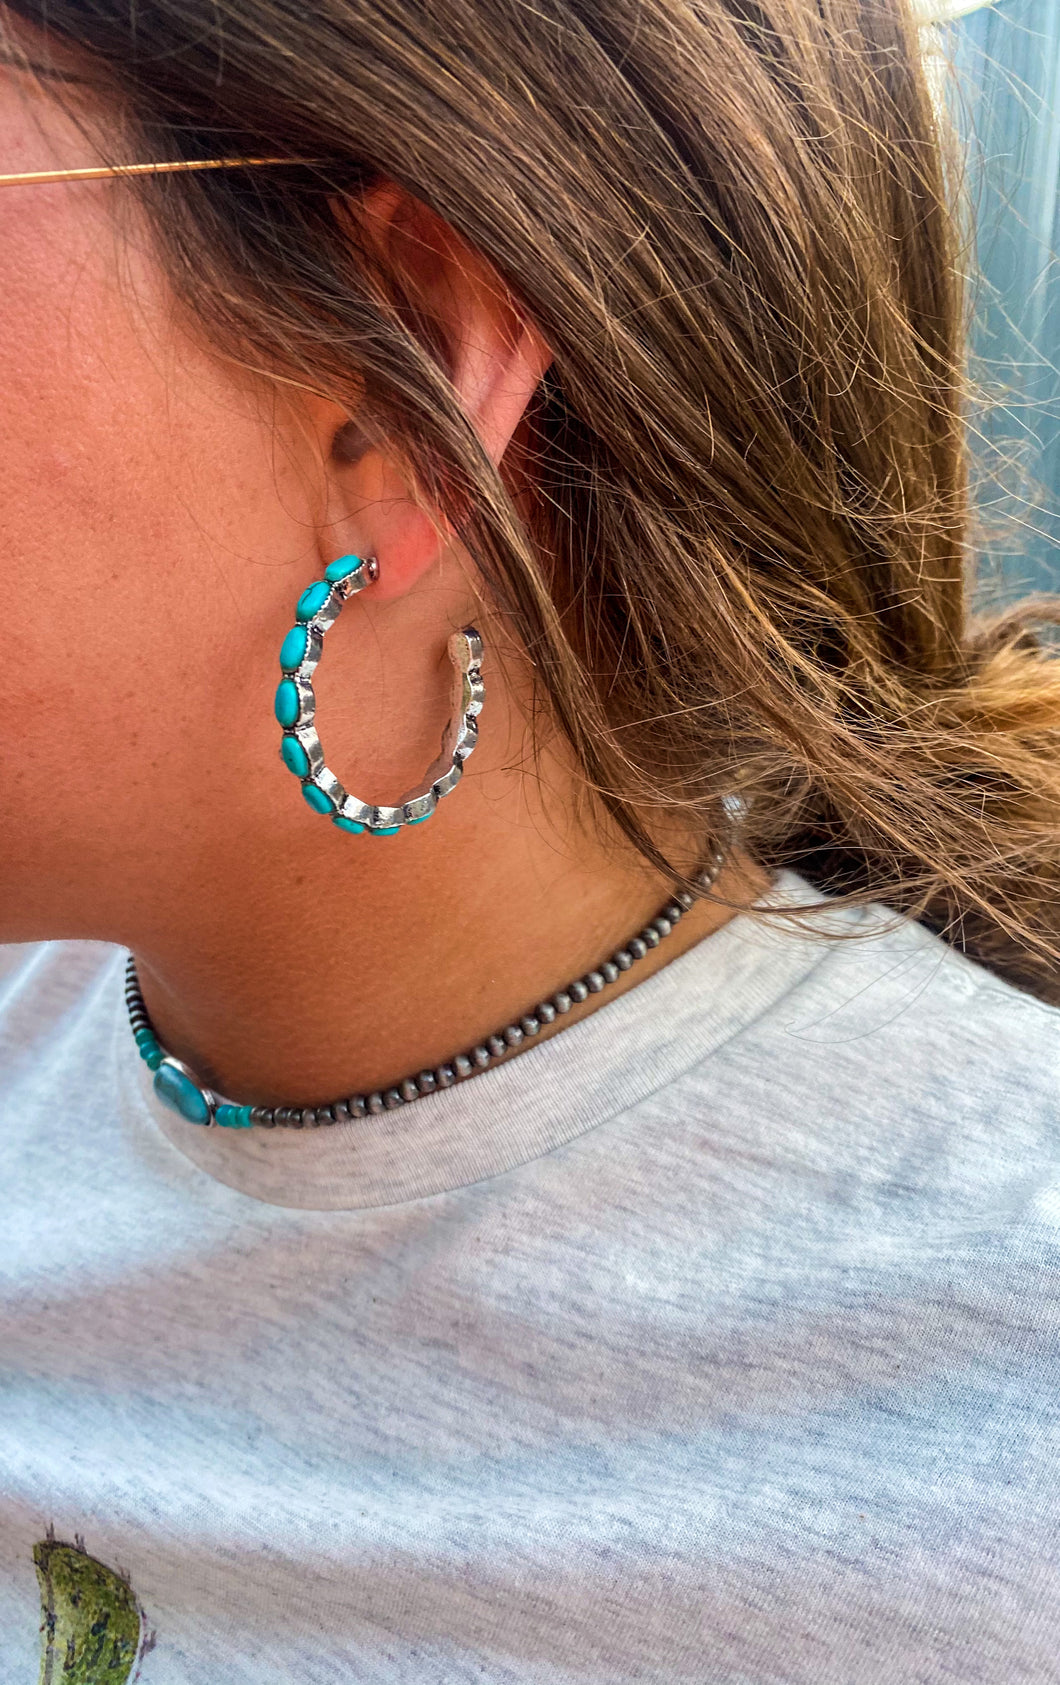 “To Be Loved Be You” Medium Sized Turquoise Hoops